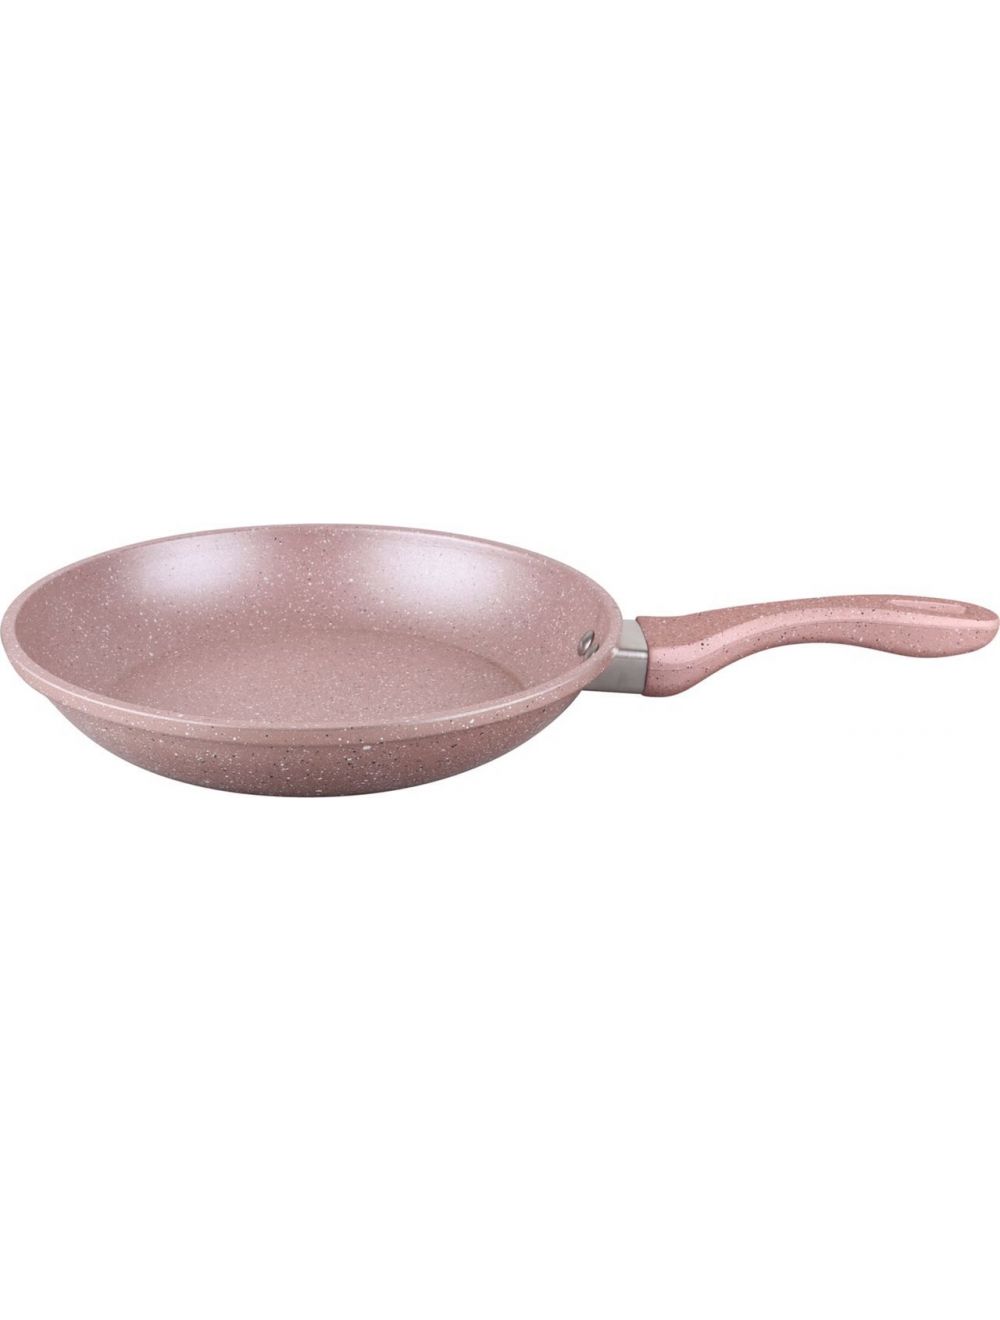 Dessini Granite Fry Pan Pink 32cm For Kitchen Best Quality In Use-AKA624